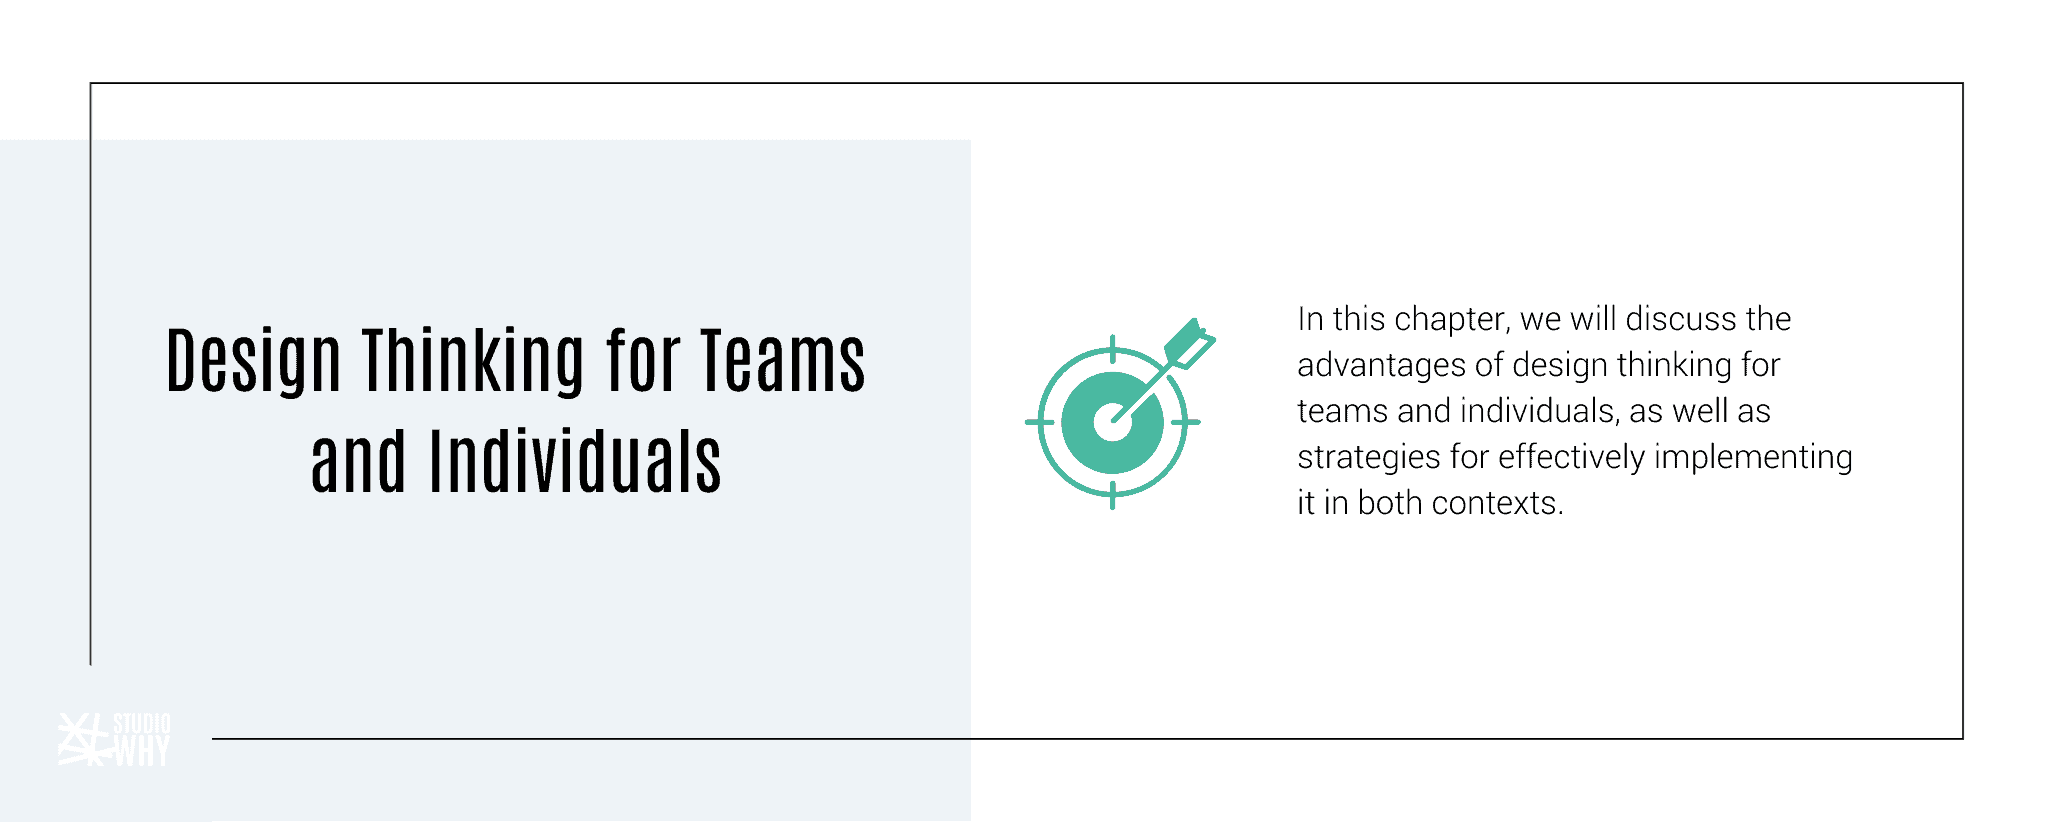 Design Thinking for Teams and Individuals